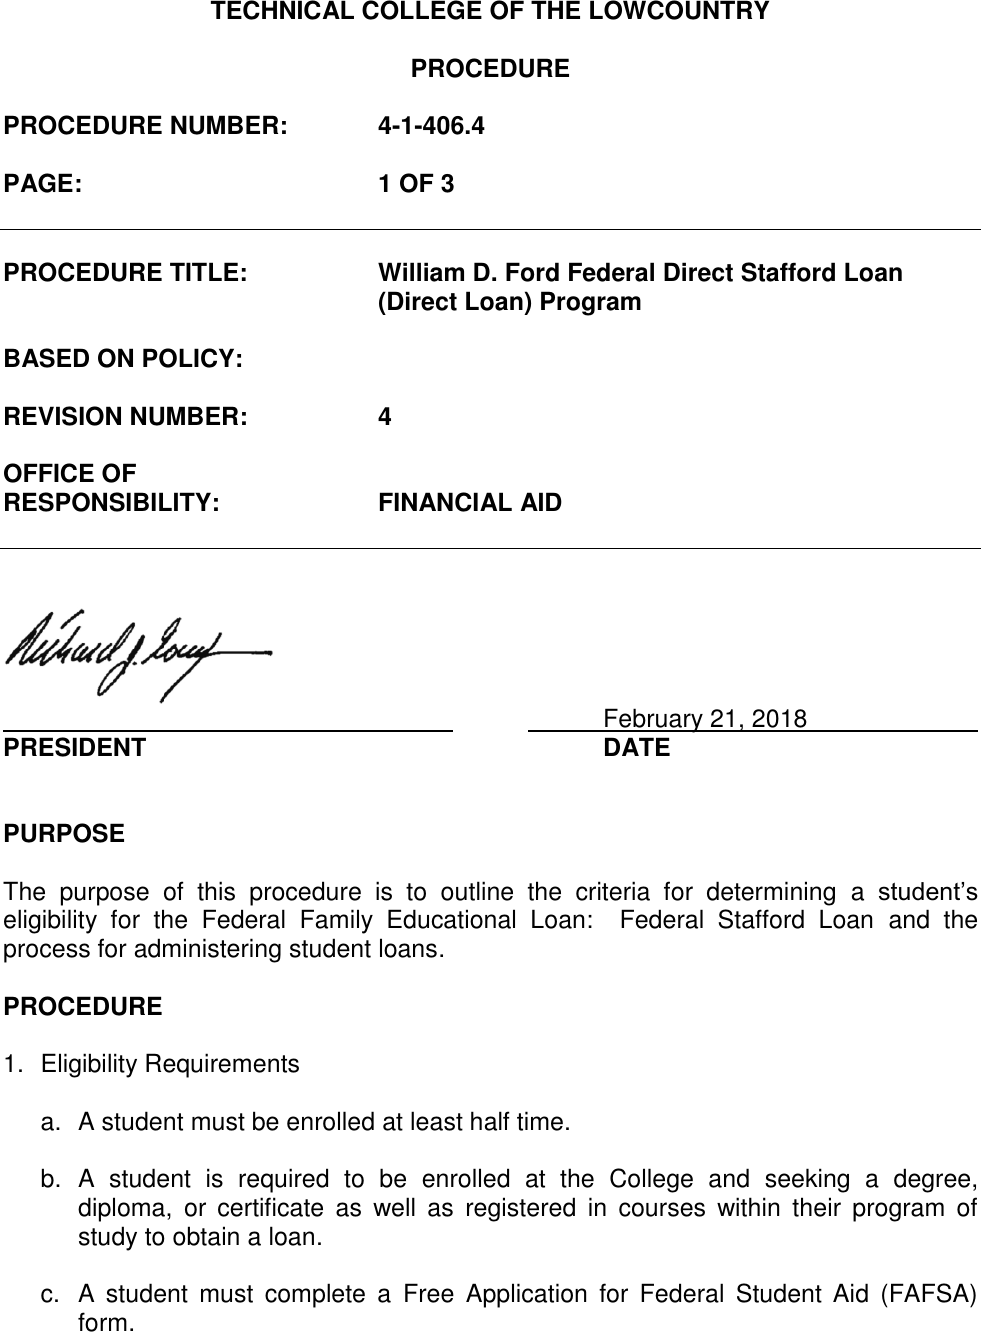 Page 1 of 3 - 4-1-406.4-William-D.-Ford-Federal-Direct-Loan-Direct-Loan-Program